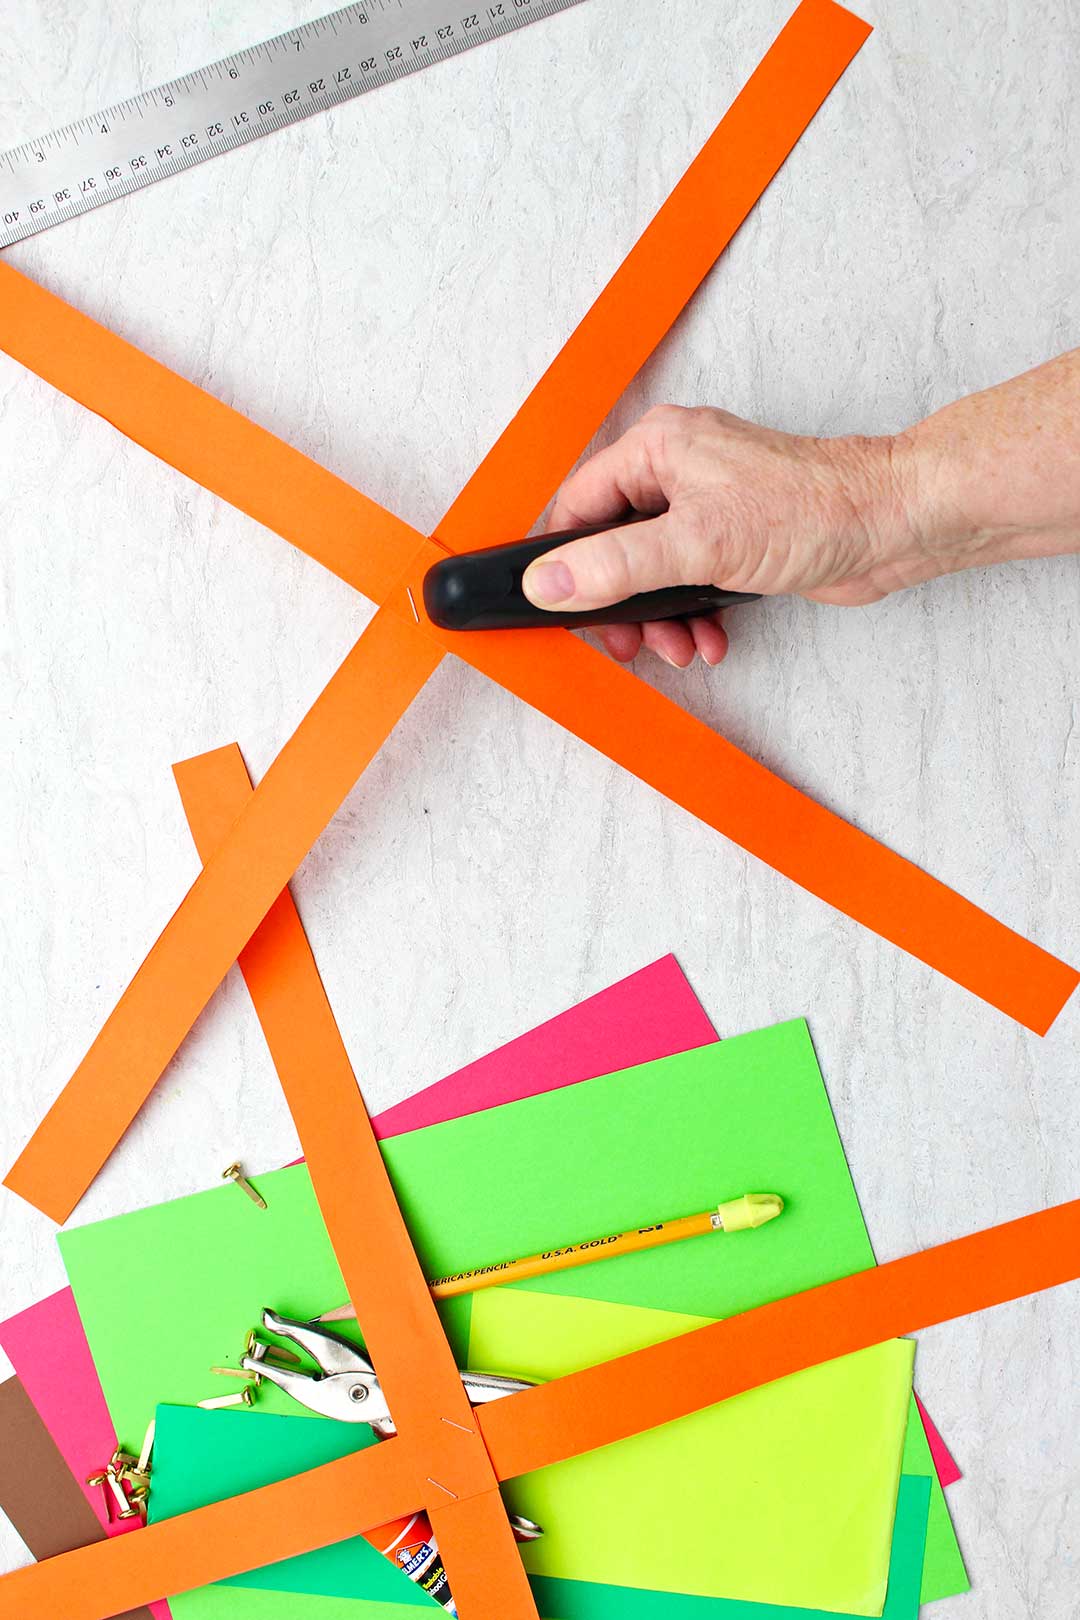 Hand stapling four strips of orange paper into "x" shape.